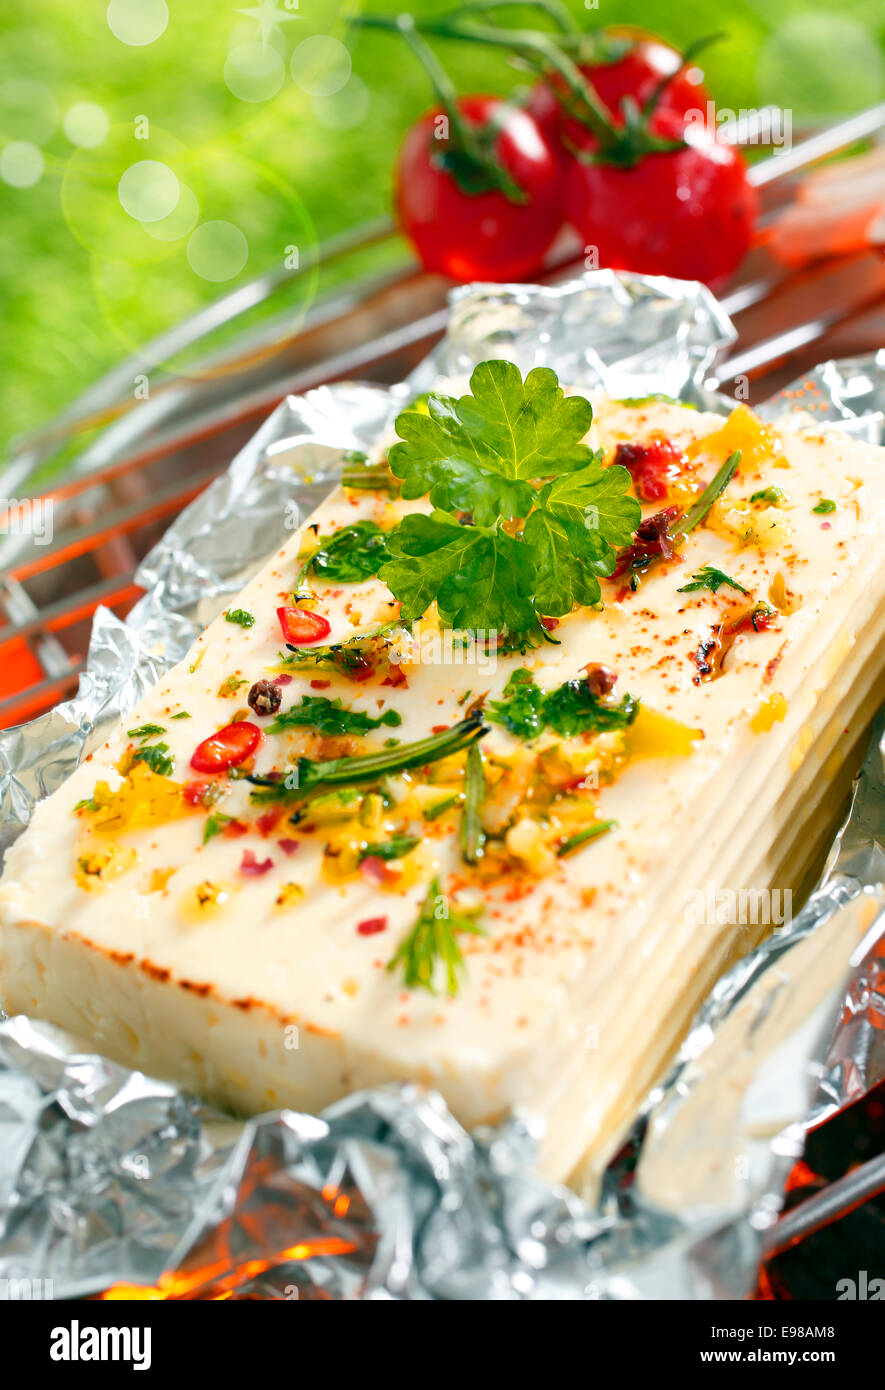 A delicious portion of feta cheese or halloumi topped with fresh herbs and spices grilling on an outdoor barbecue Stock Photo